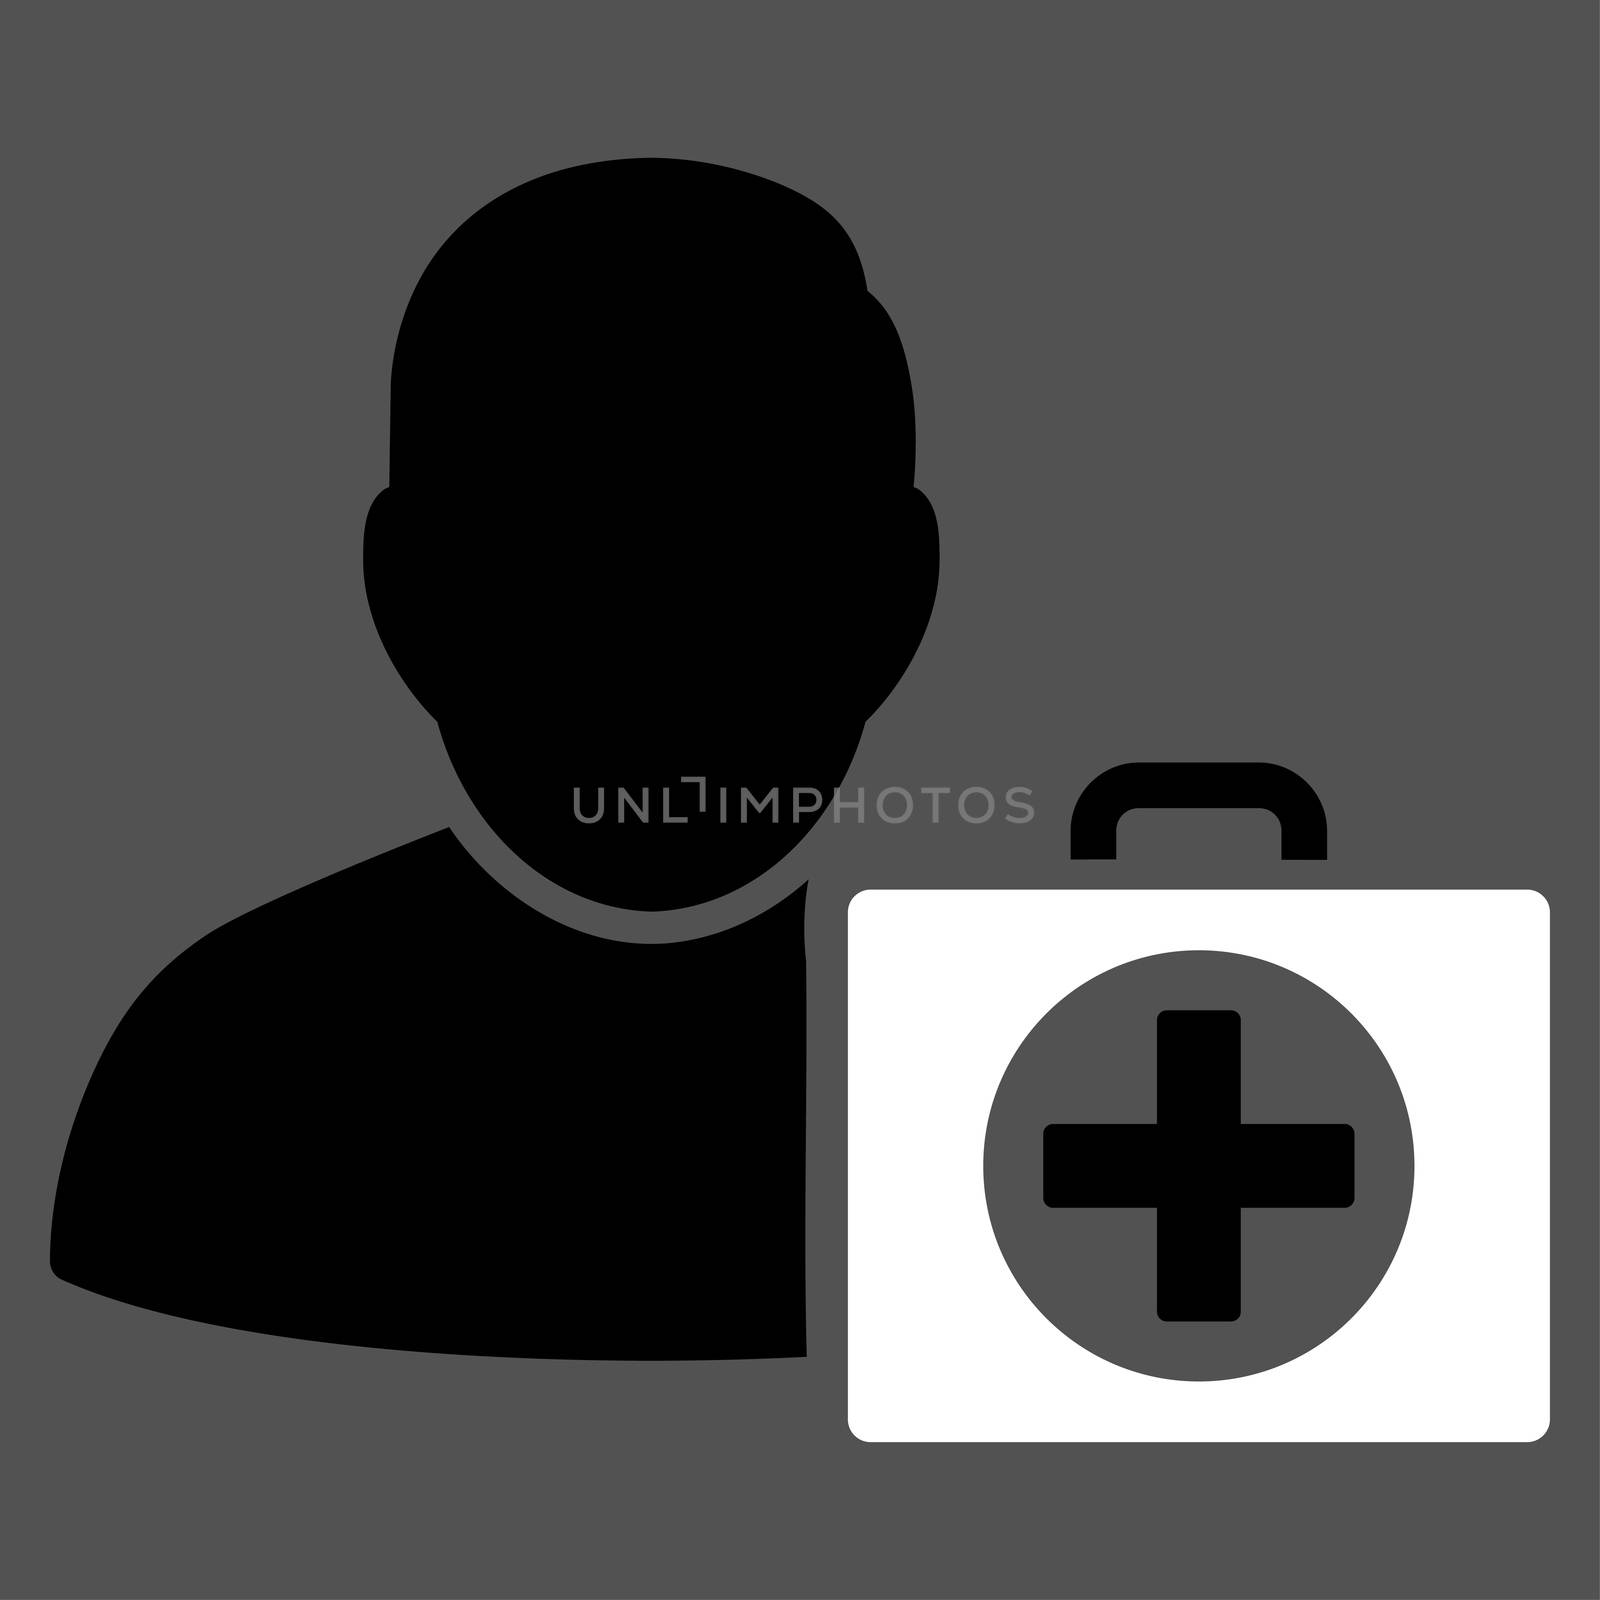 First Aid Man raster icon. Style is bicolor flat symbol, black and white colors, rounded angles, gray background.